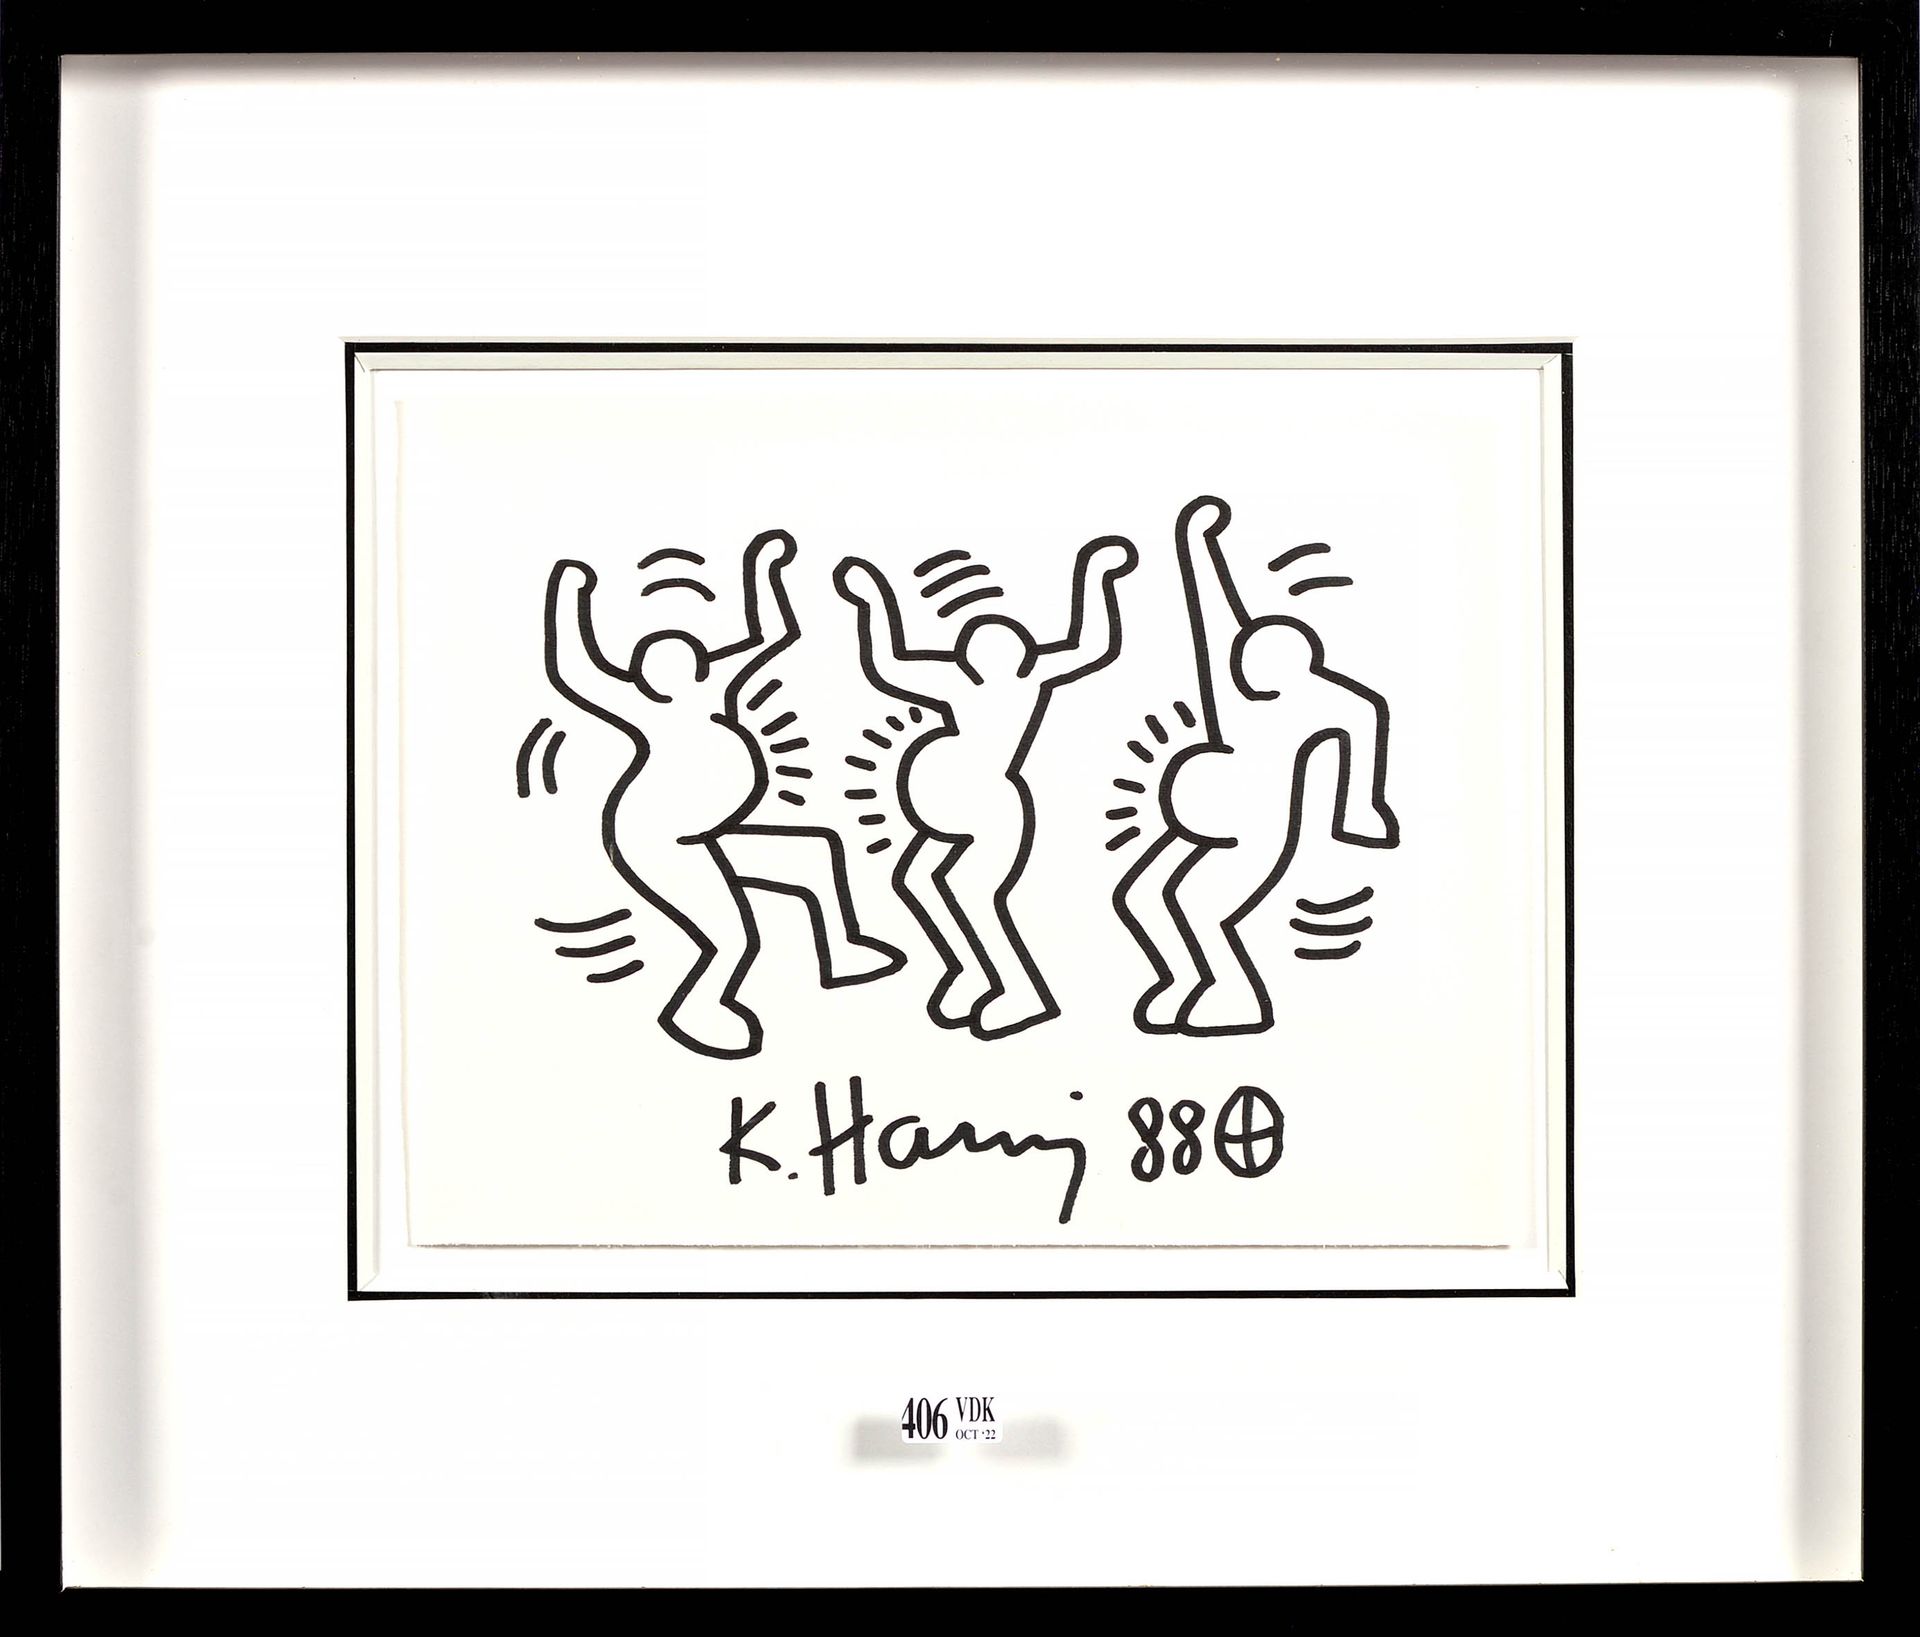 HARING Keith (1958 - 1990) "Nativity" black felt pen on paper. Signed and dated &hellip;